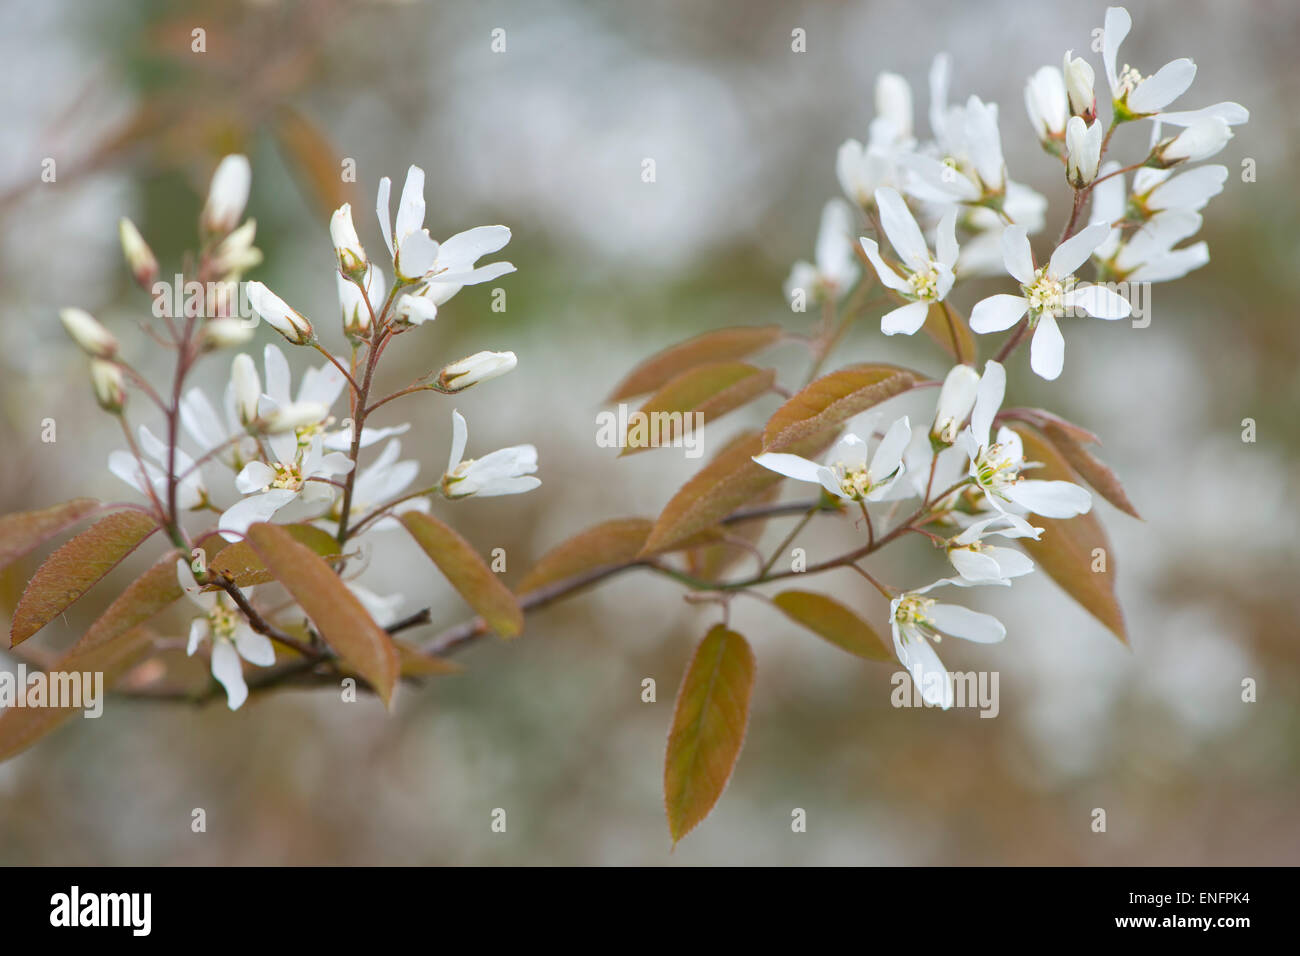 Canadian serviceberry (Amelanchier canadensis), blossoms, Lower Saxony, Germany Stock Photo